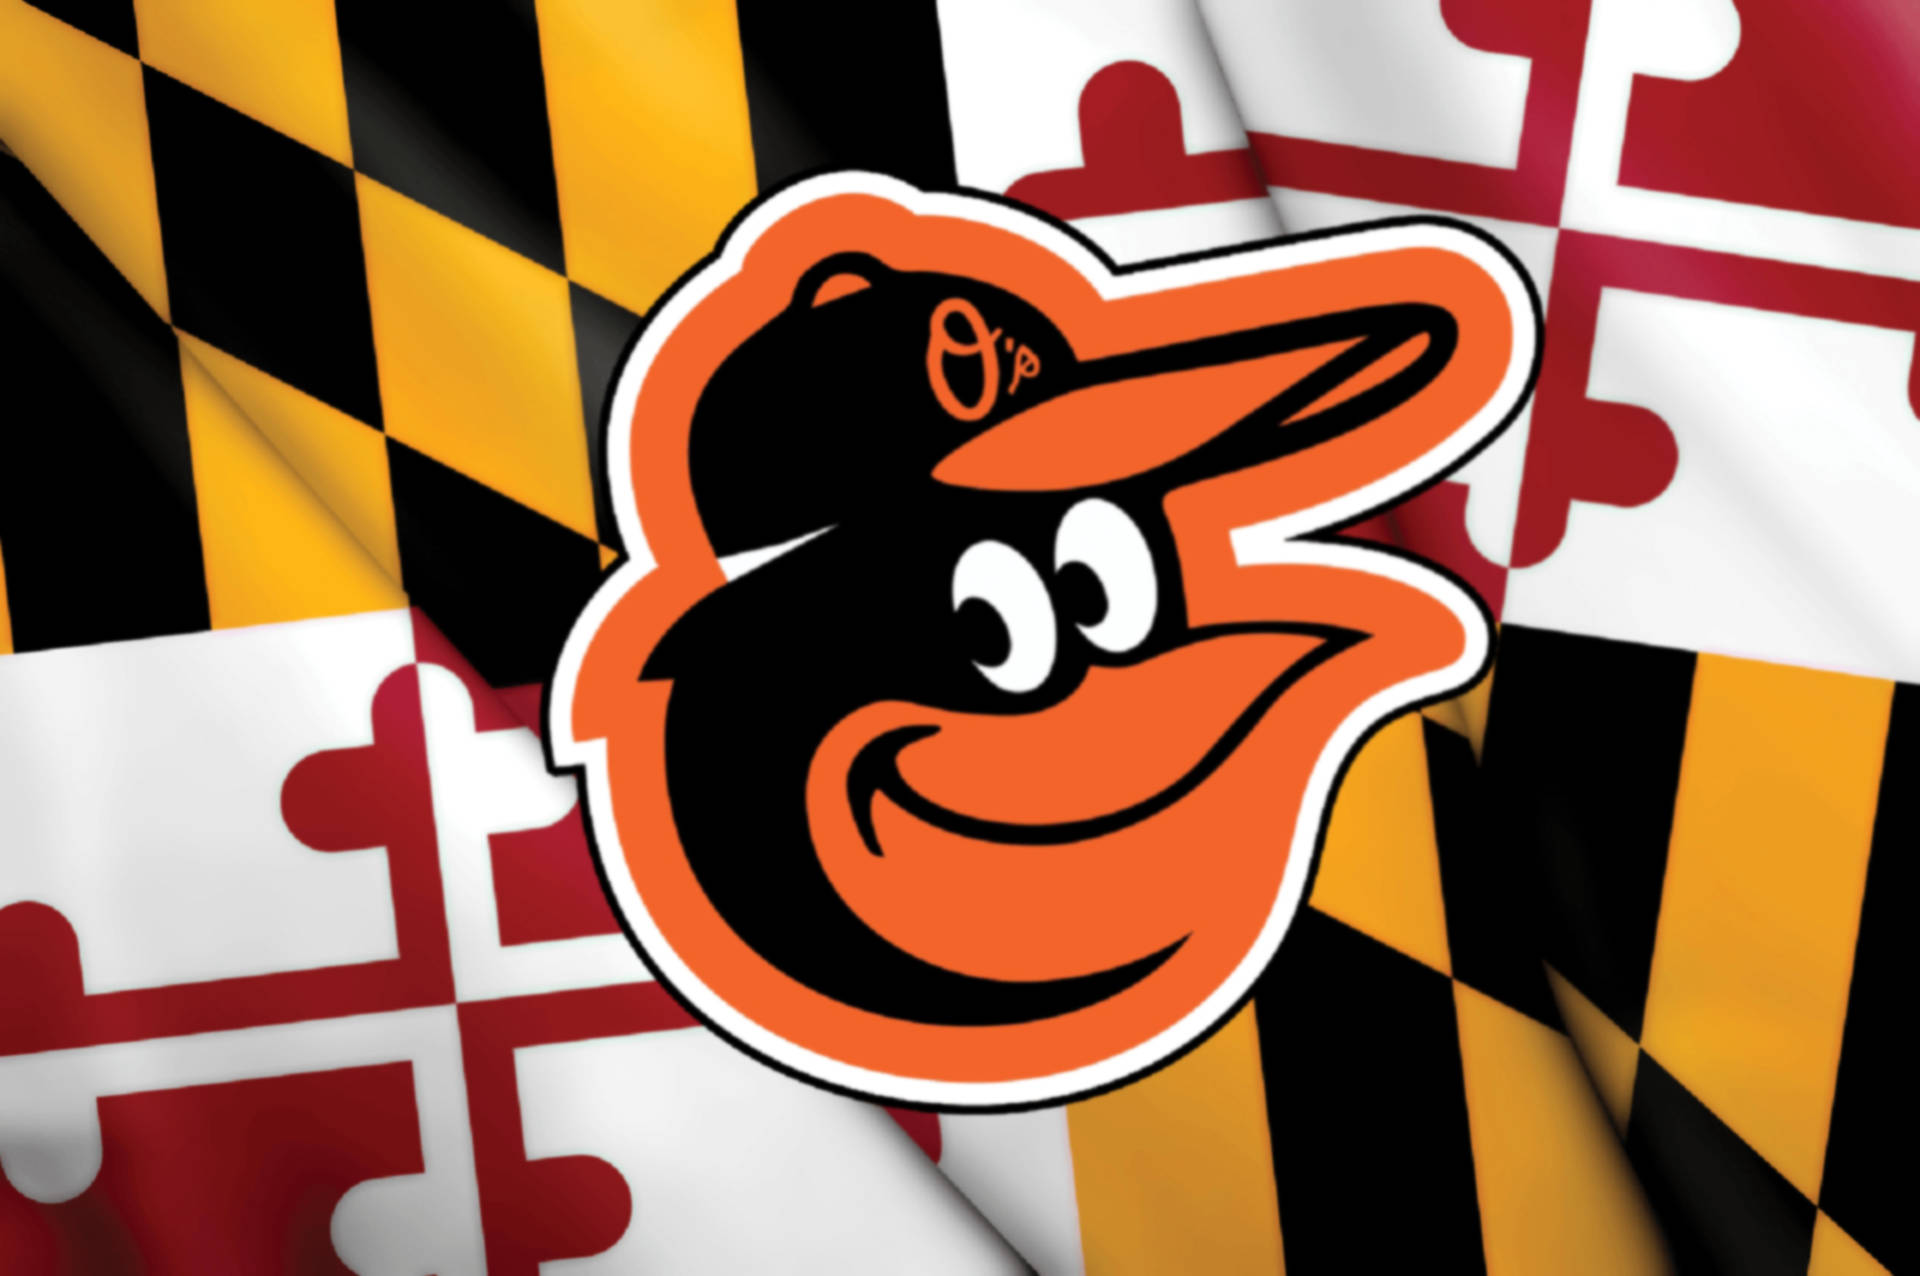 Top 999+ Baltimore Orioles Wallpaper Full HD, 4K Free to Use